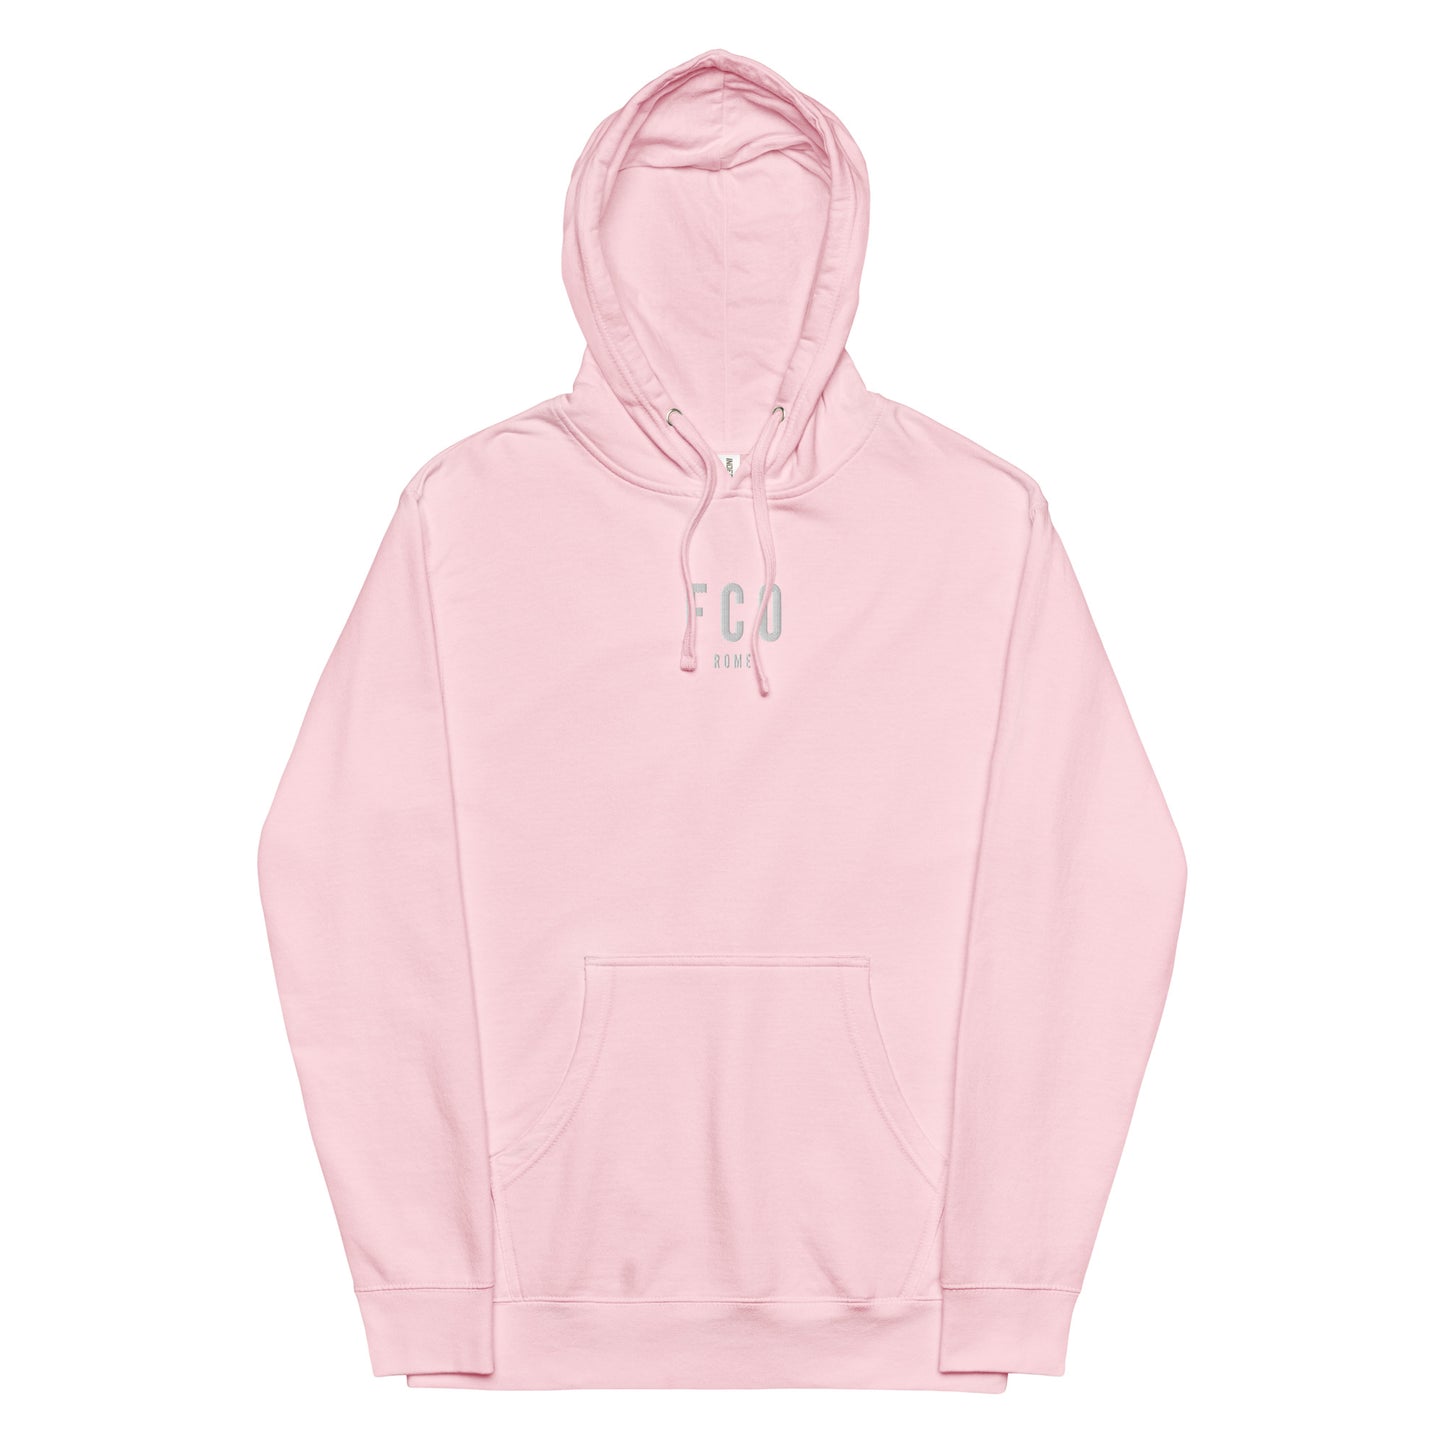 City Midweight Hoodie - White • FCO Rome • YHM Designs - Image 15